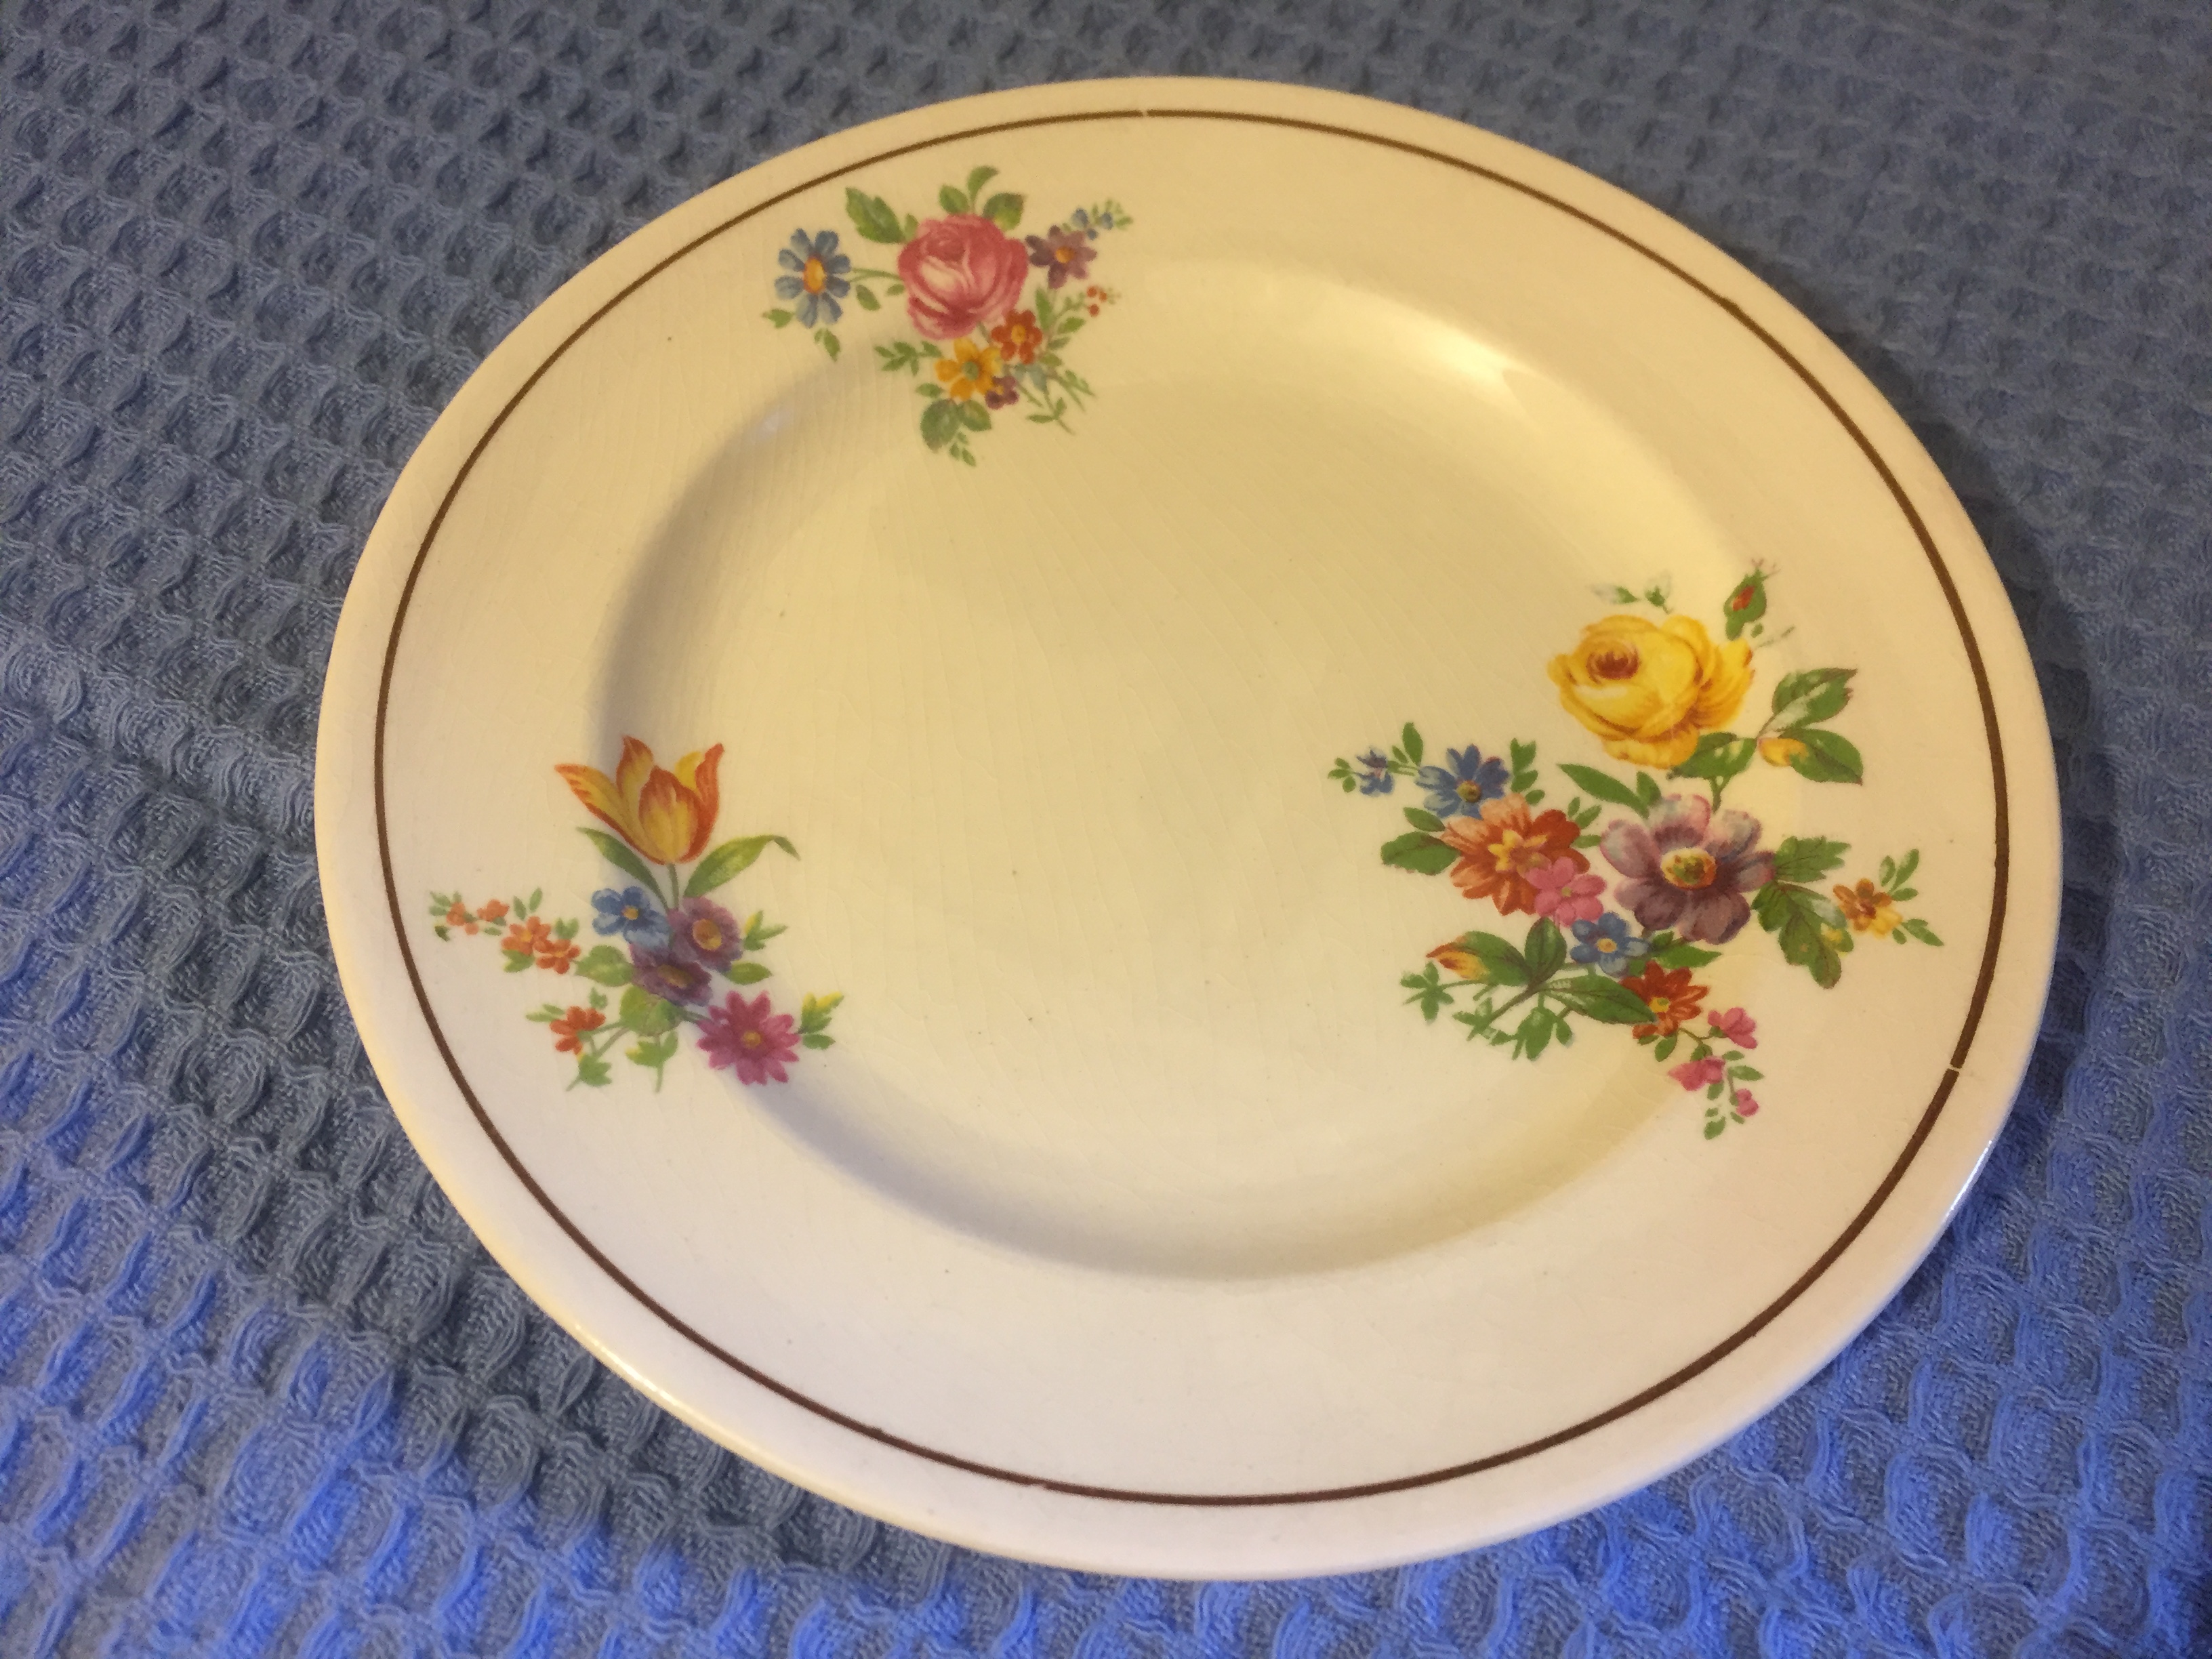 ORIGINAL DESIGN DINING SIDE PLATE FROM THE DONALDSON LINE